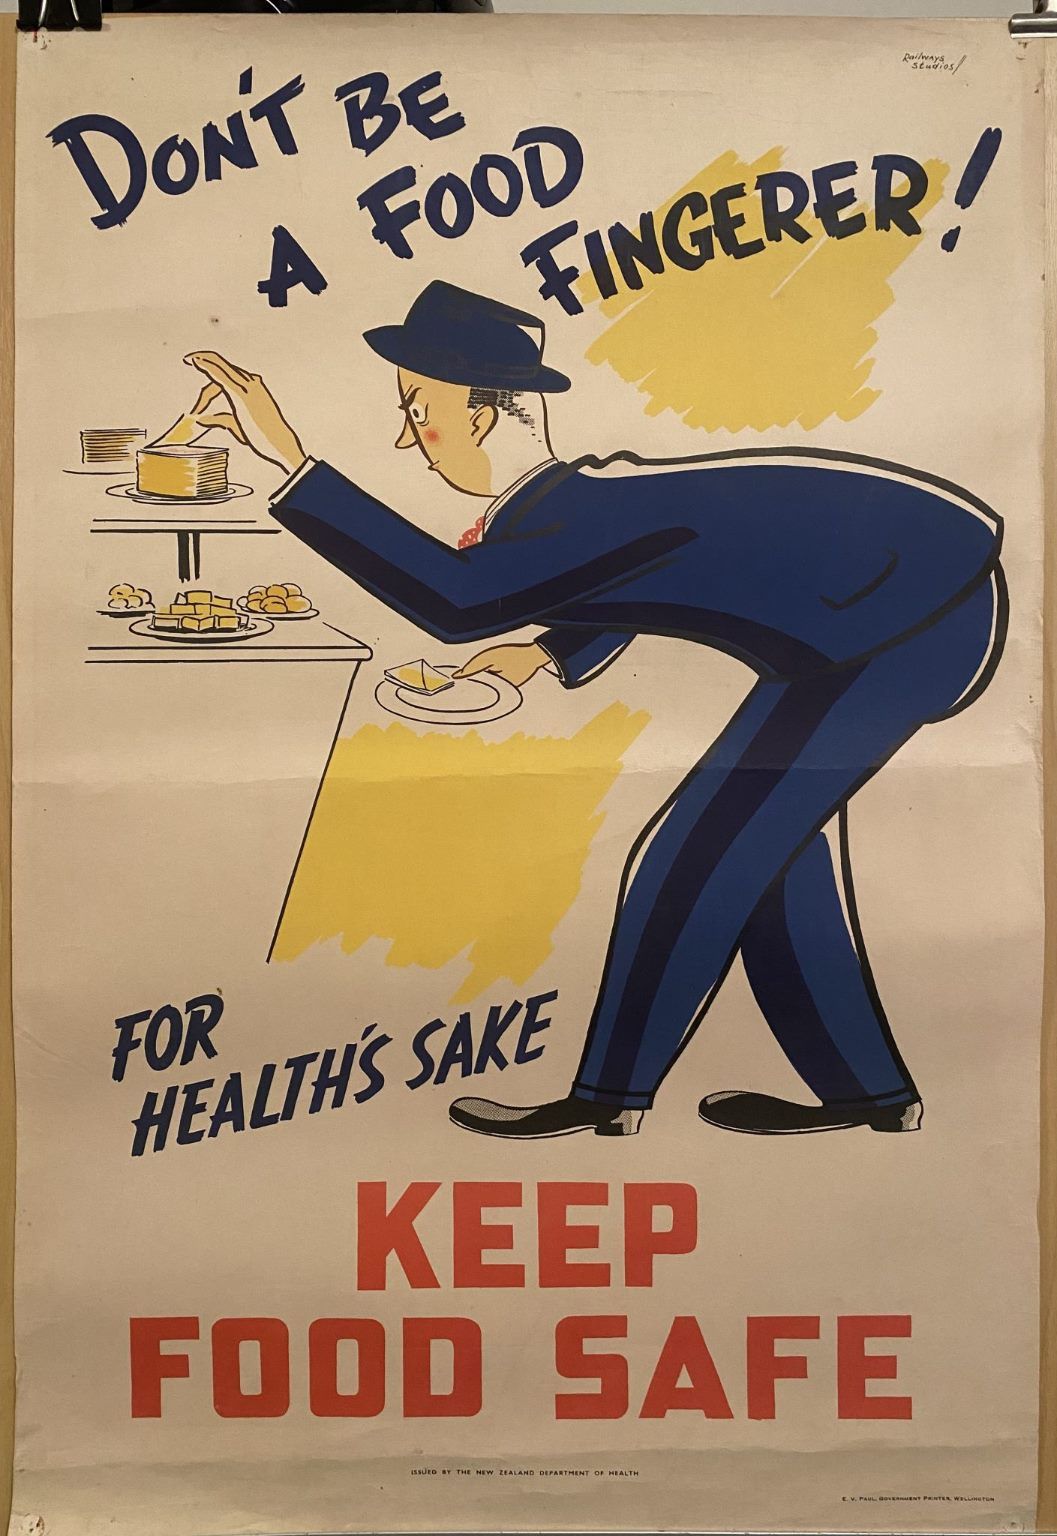 VINTAGE POSTER: New Zealand Department of Health / Keep Food Safety 1950s